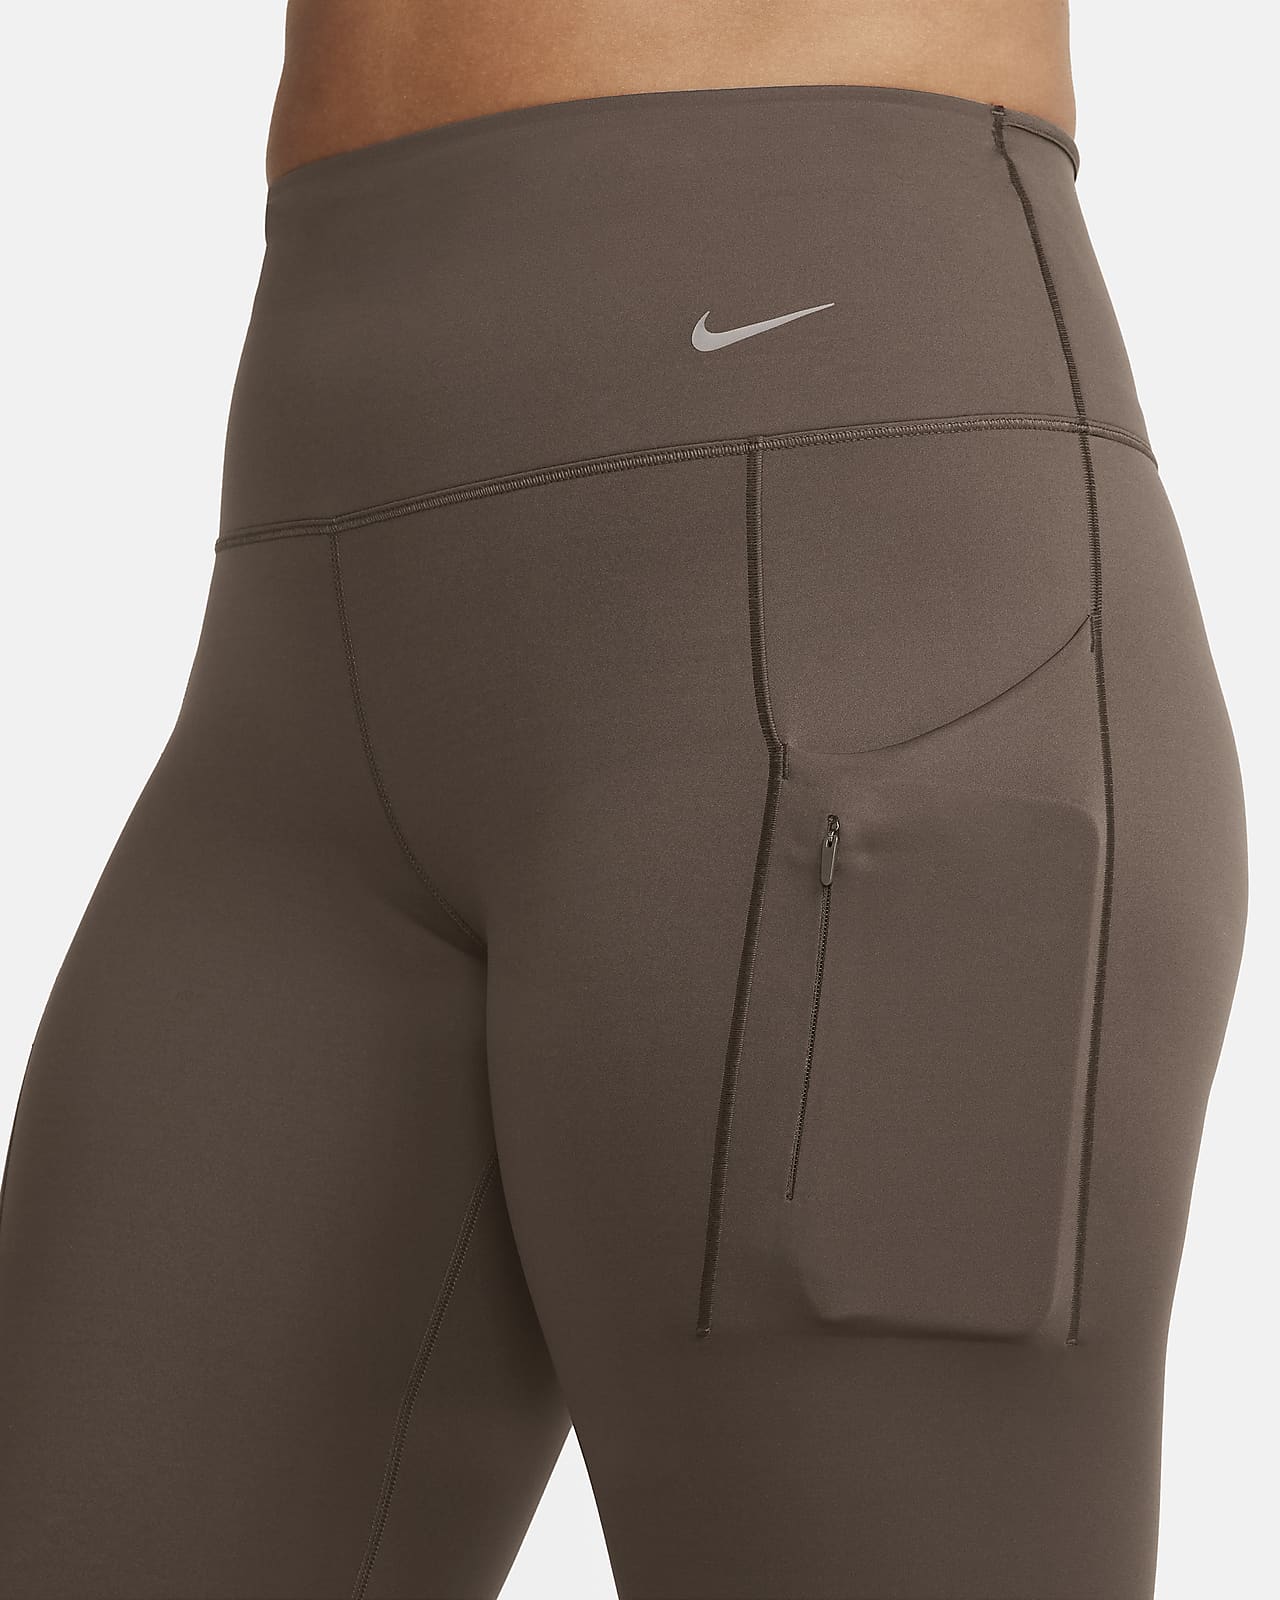 Nike Go Women's Firm-Support High-Waisted Cropped Leggings with Pockets.  Nike SG